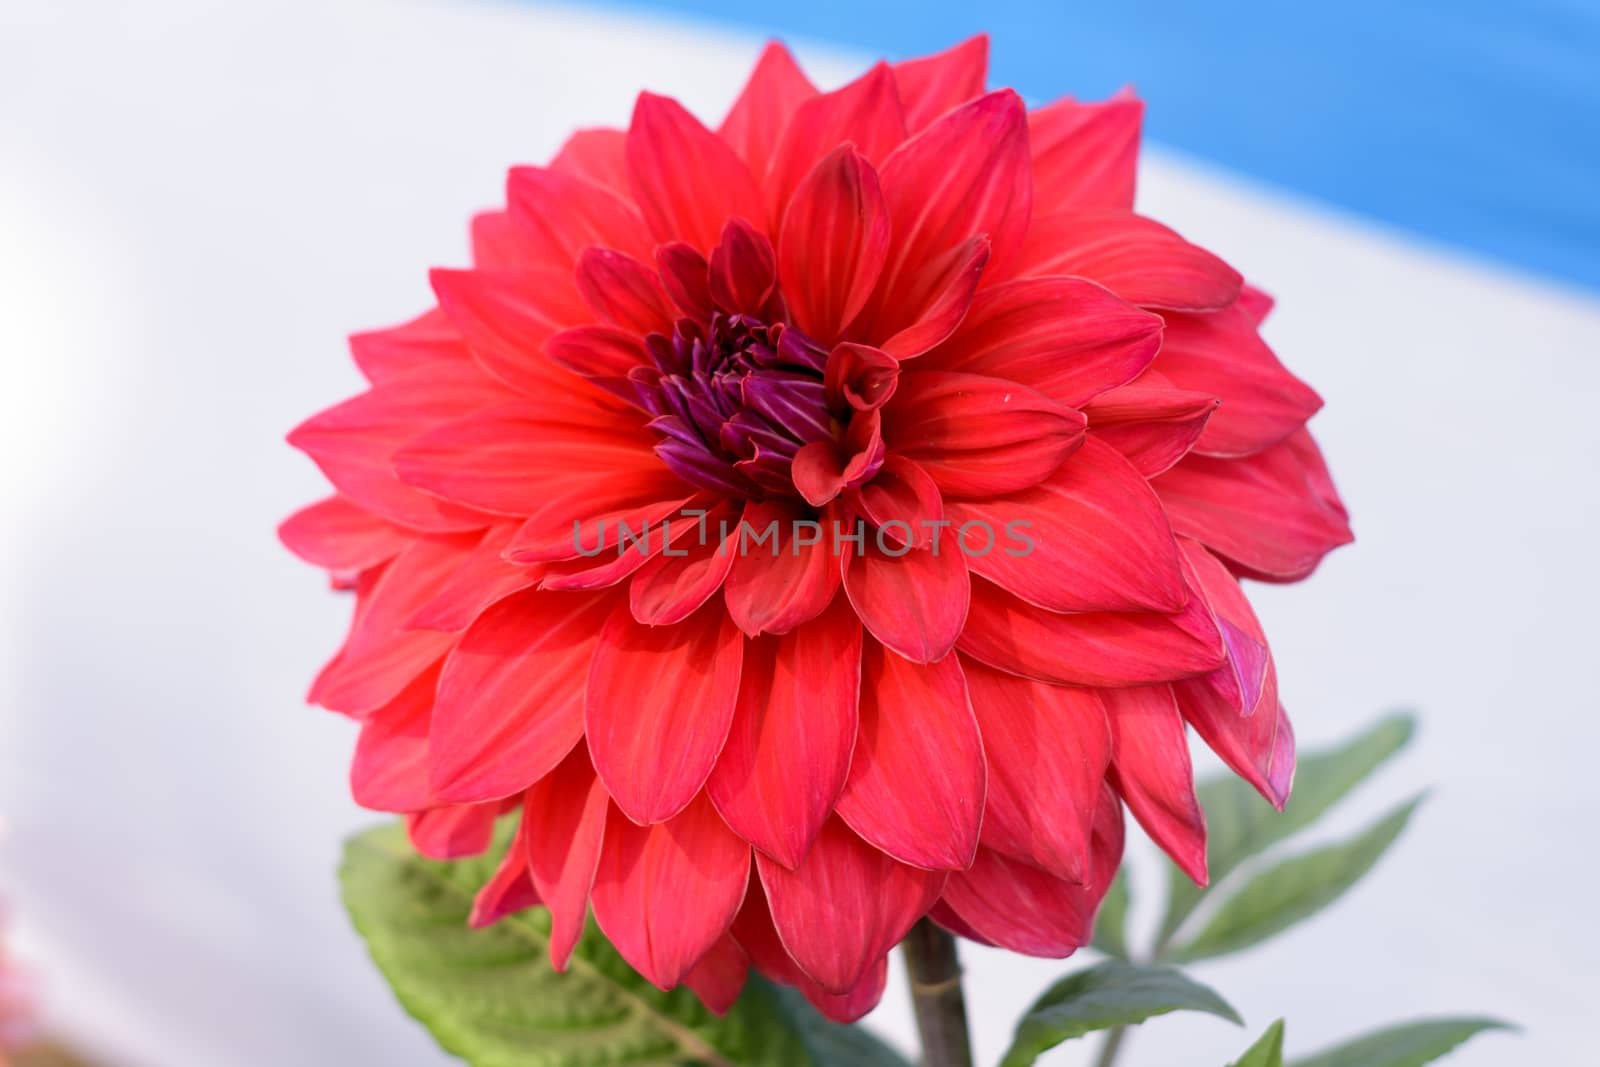 Multi layer petals Red Aster. Aster is a genus of perennial in the family Asteraceae. A sun loving plant Blooms in winter spring and summer. Popular flower for bouquets, symbol of love or friendship.